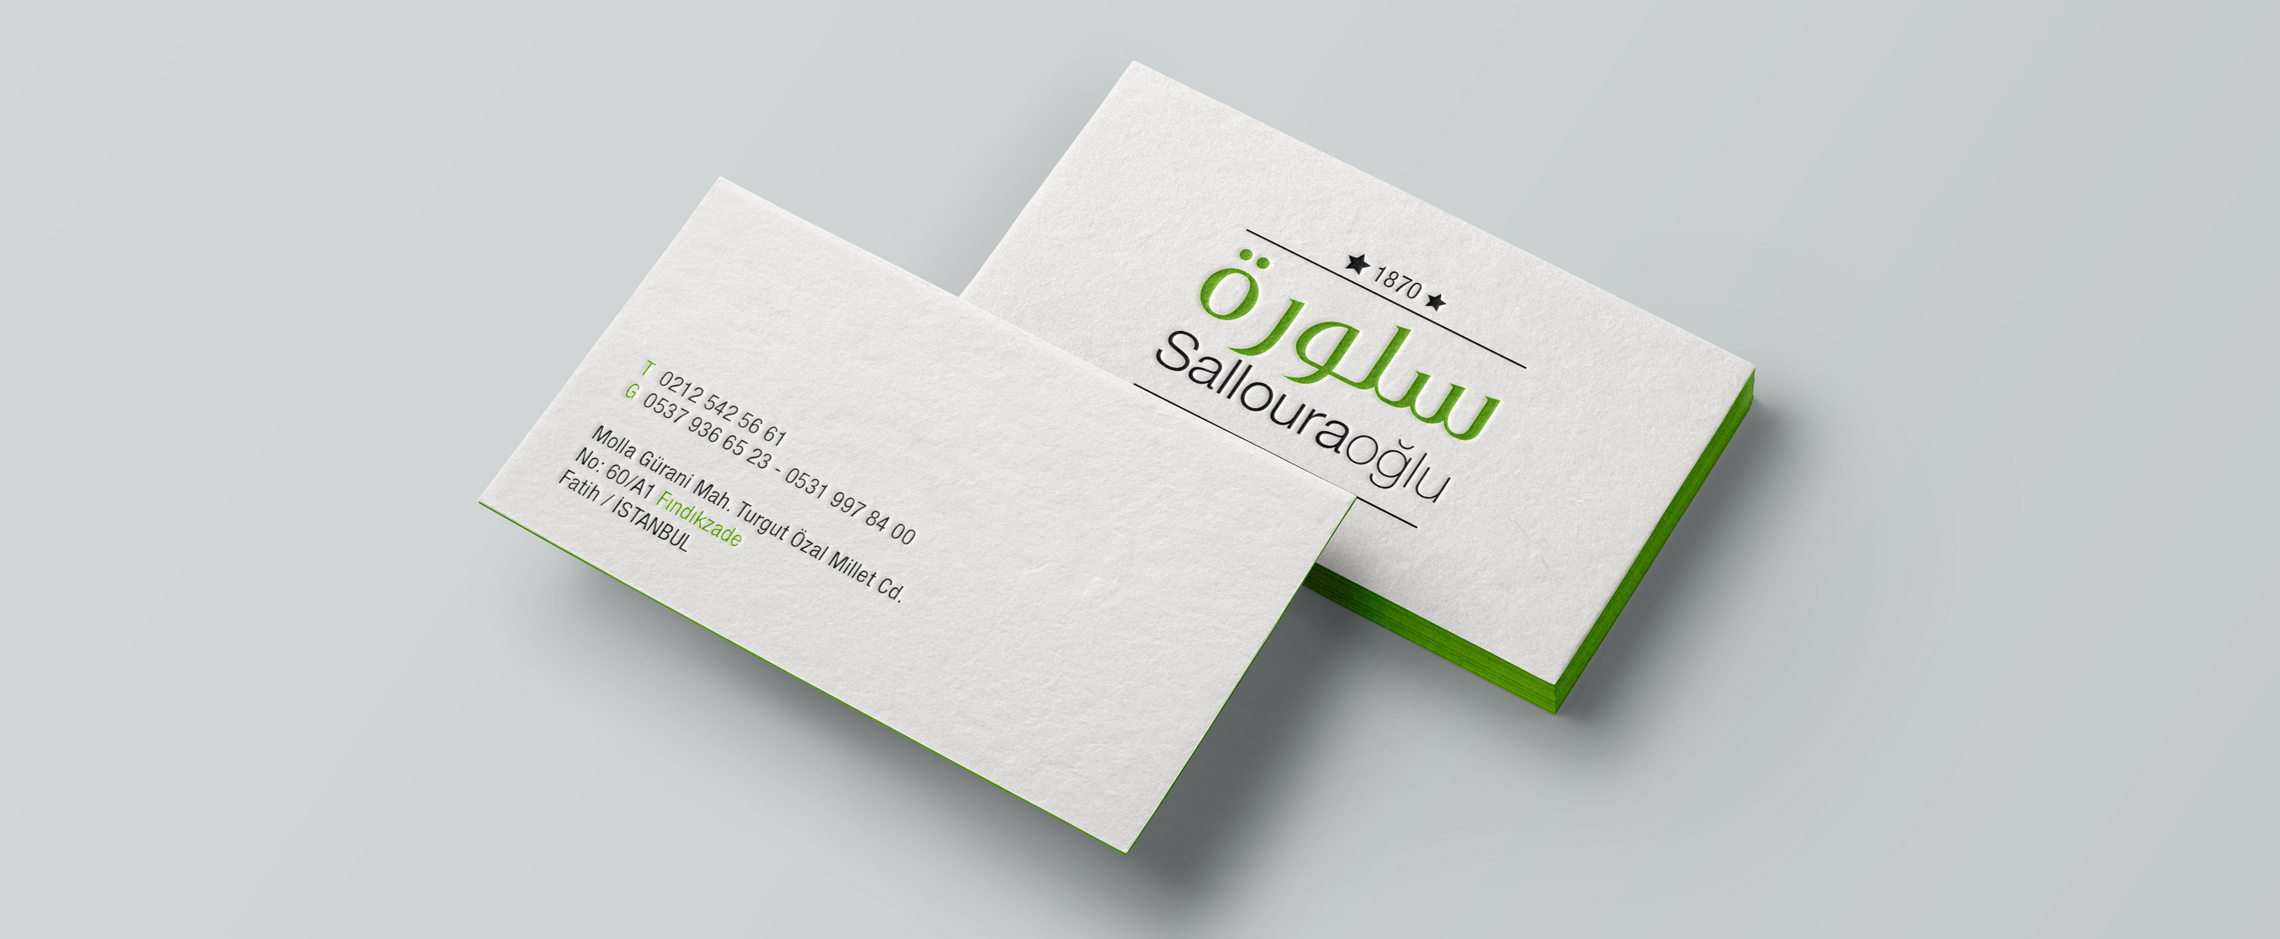 THE STONE LAW FIRM BRANDING